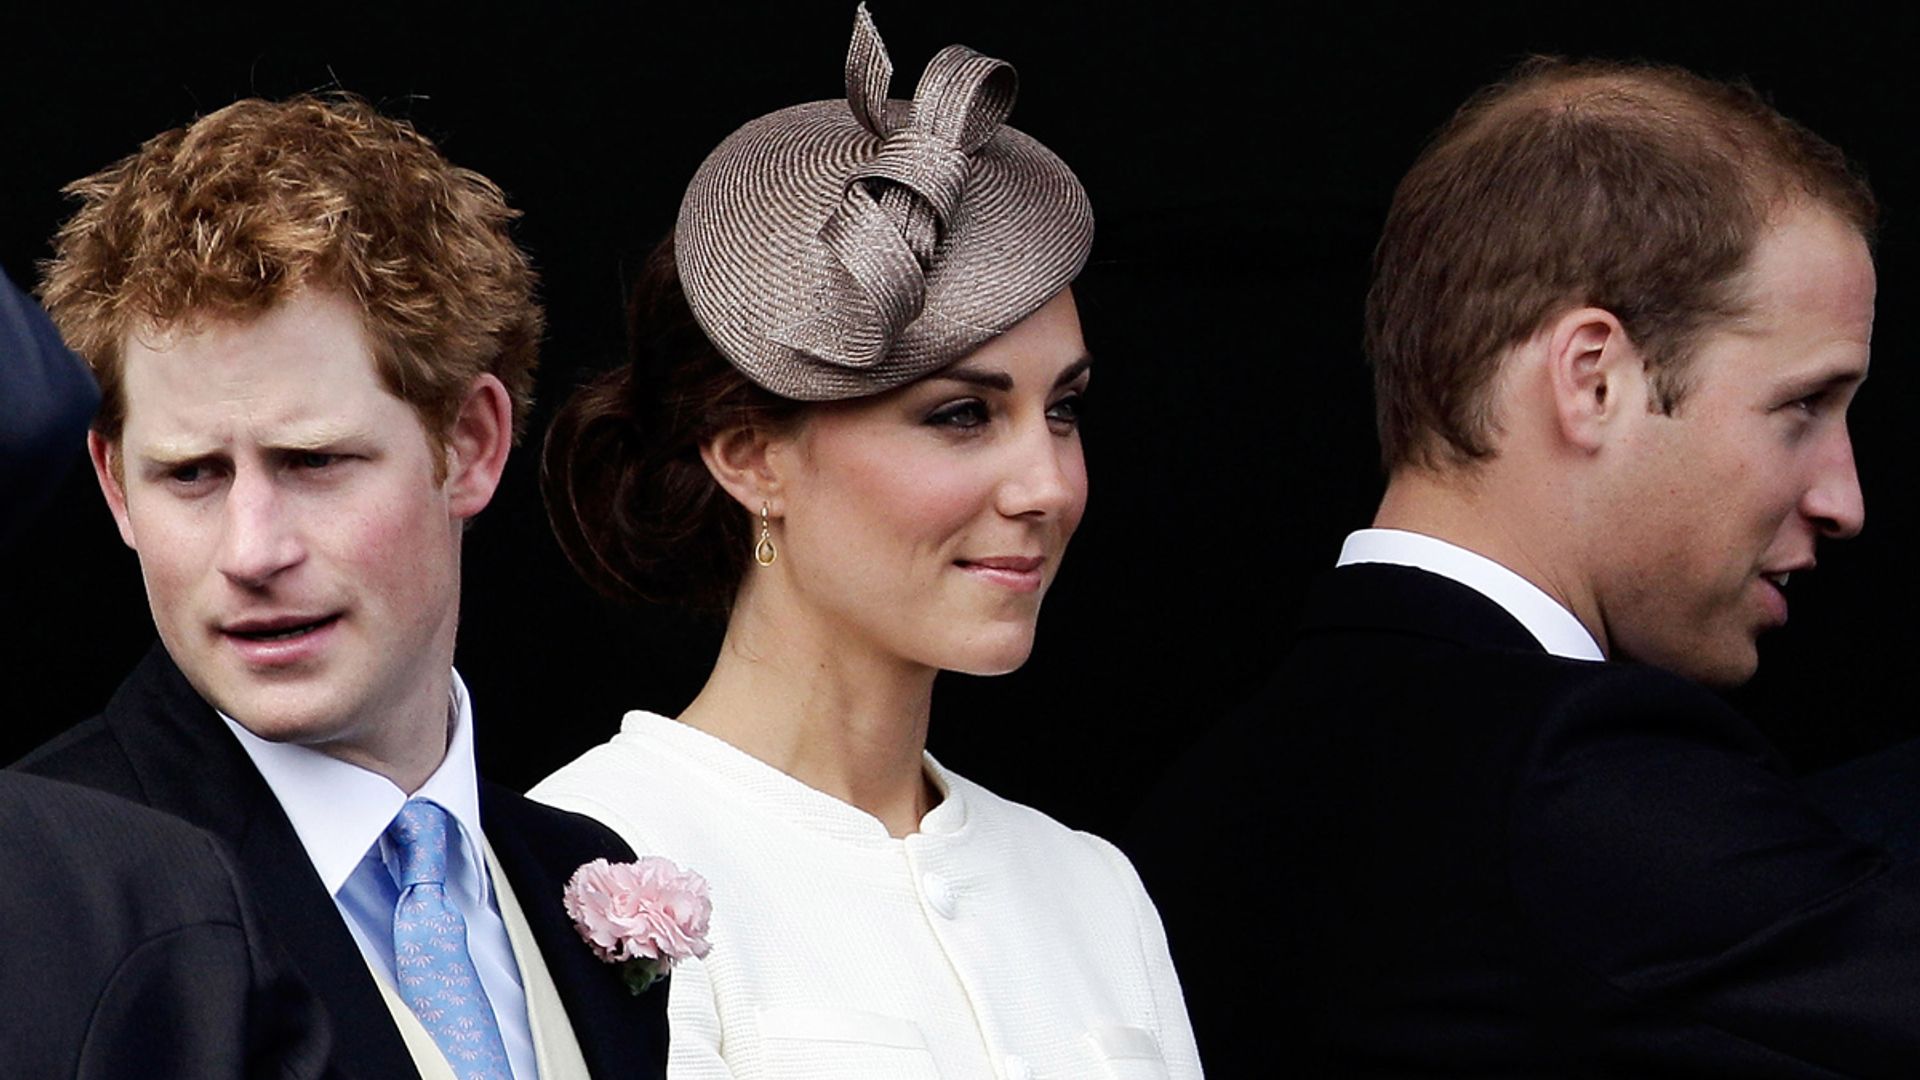 Prince Harry makes unexpected remark about Prince William and Kate Middleton's wedding | HELLO!